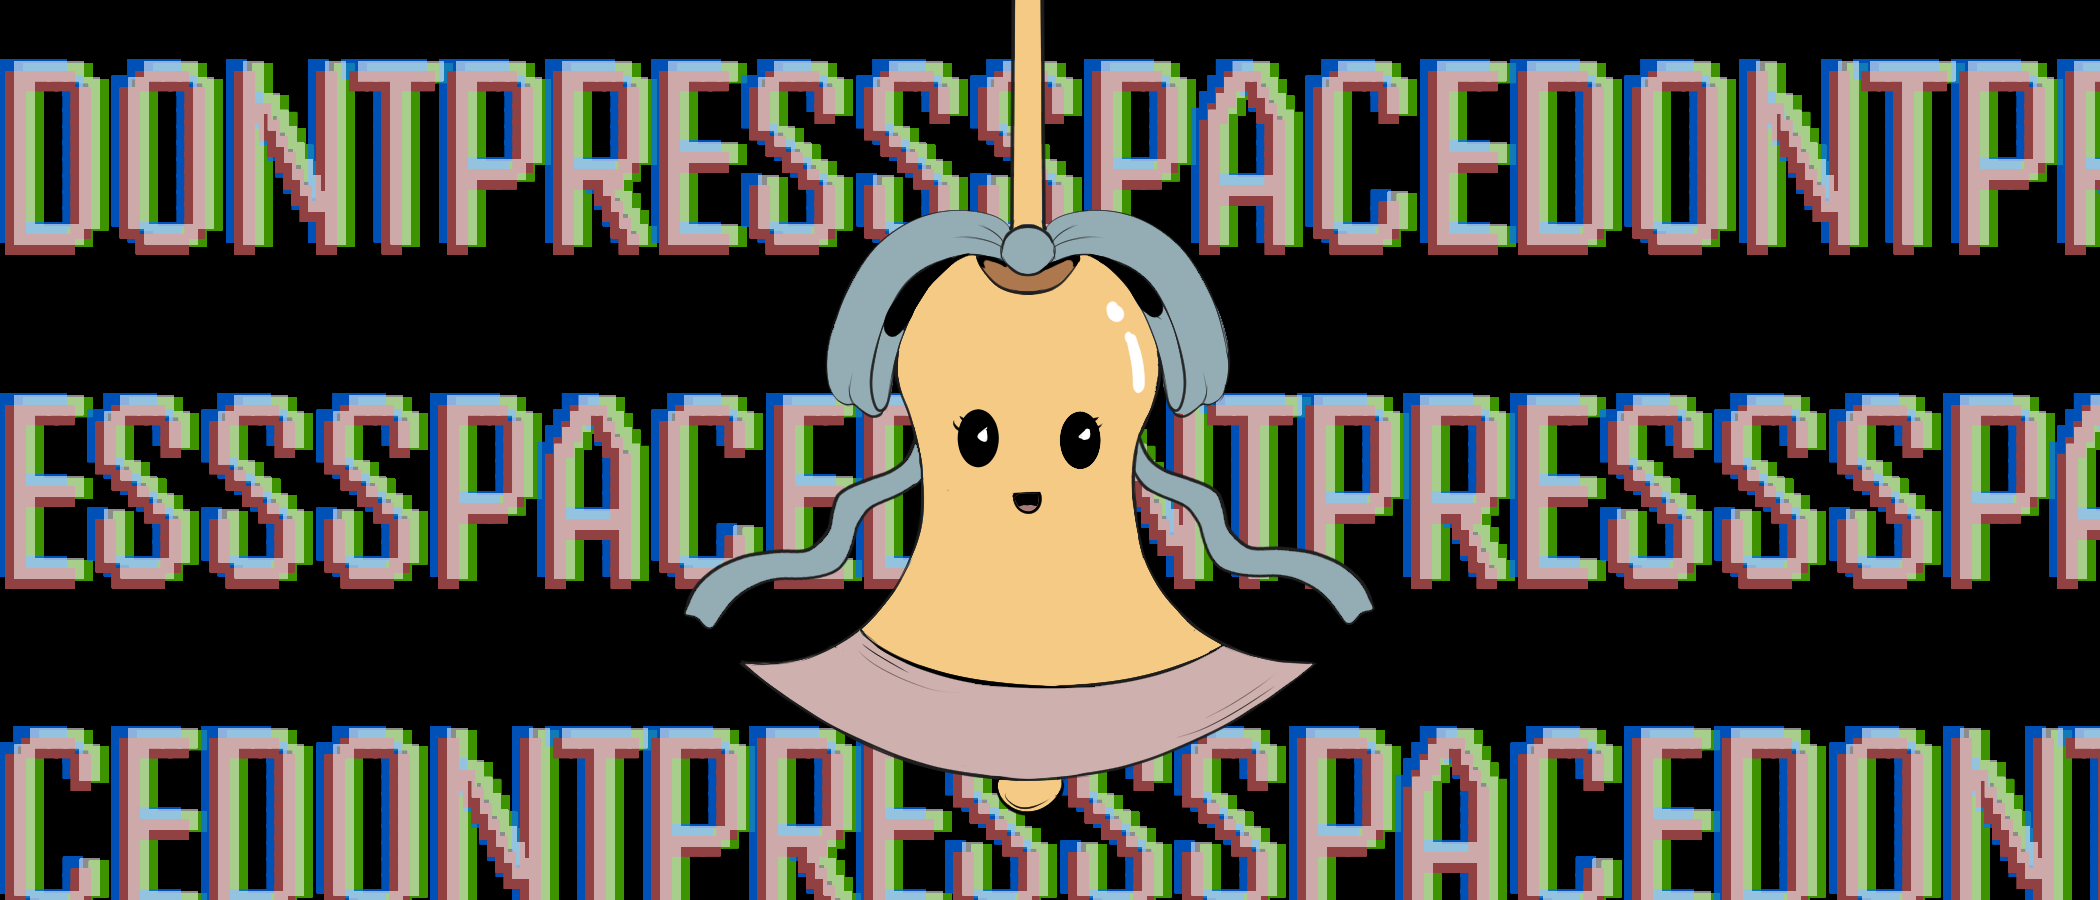 DONT_PRESS_SPACE